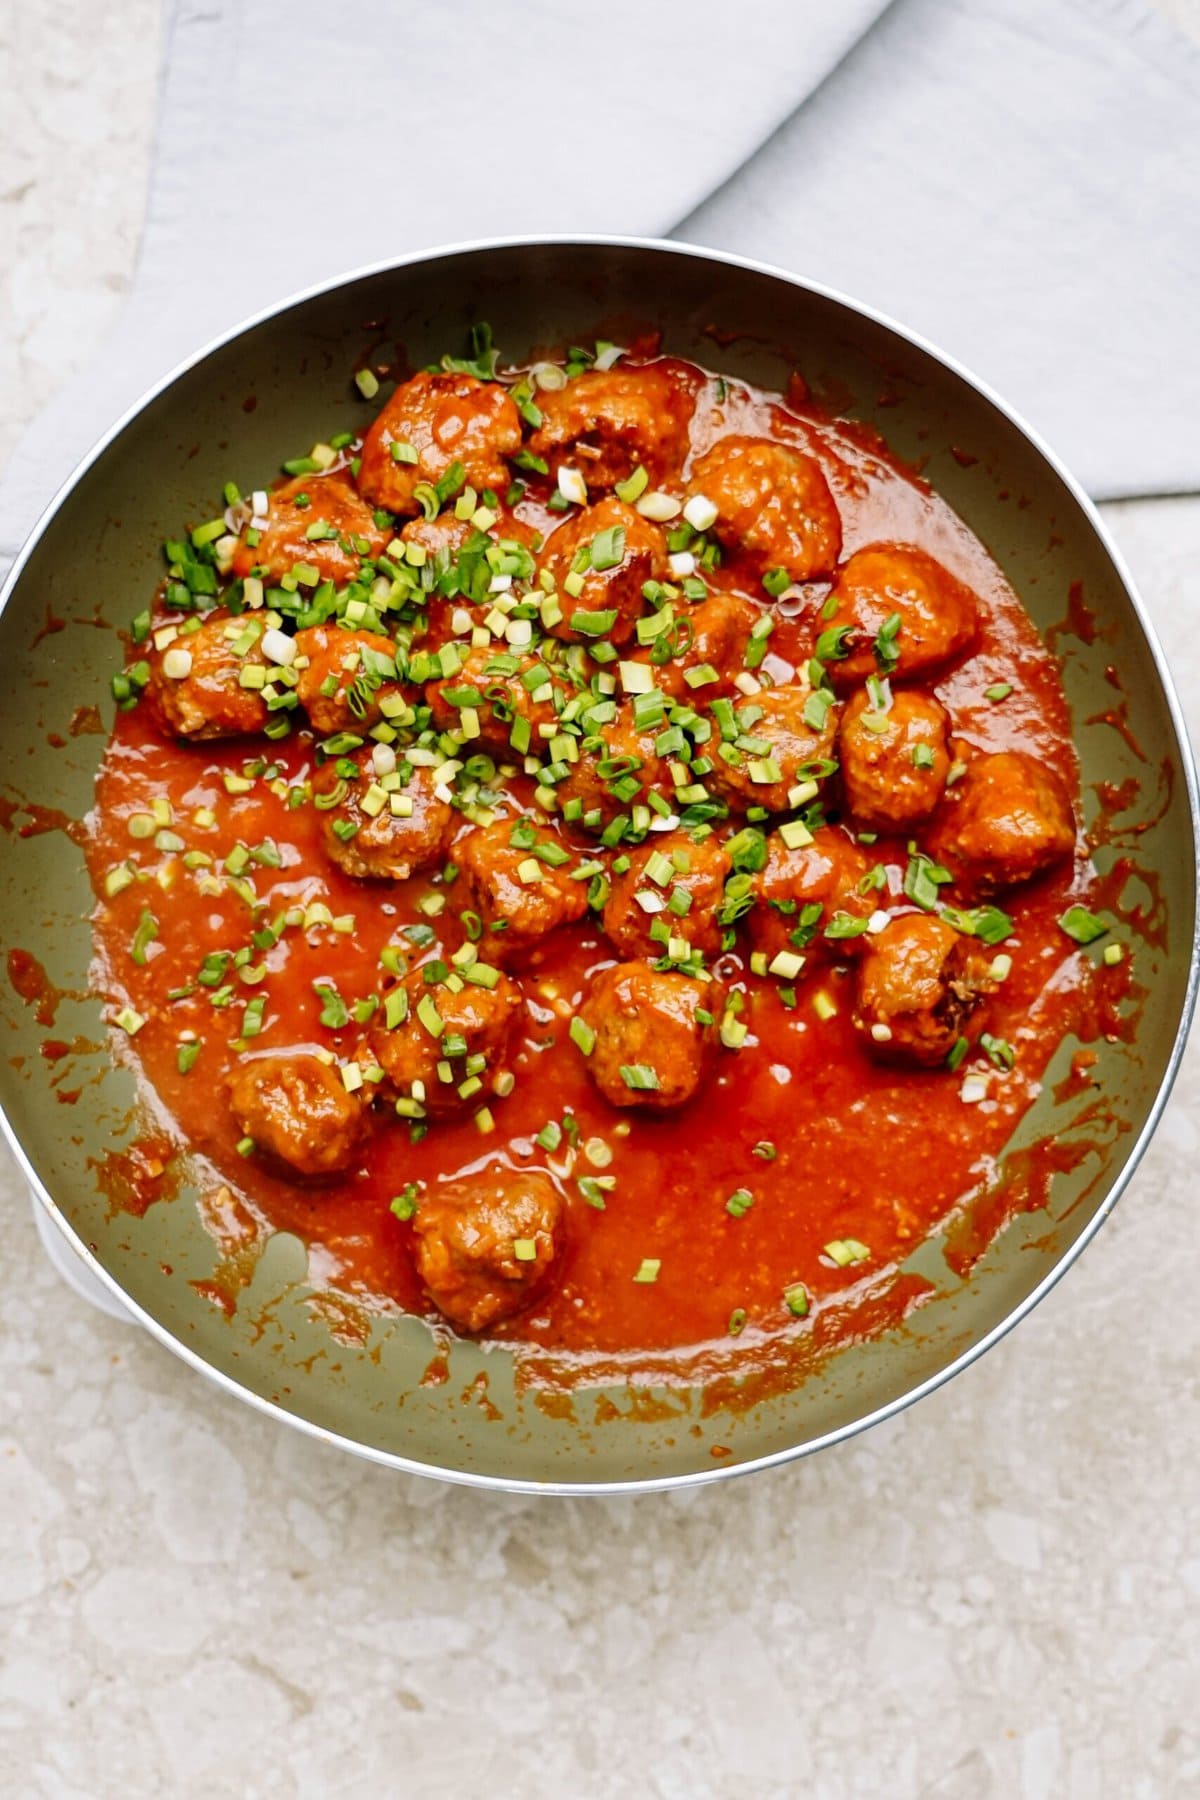 Bowl of meatballs in tomato sauce garnished with chopped herbs.